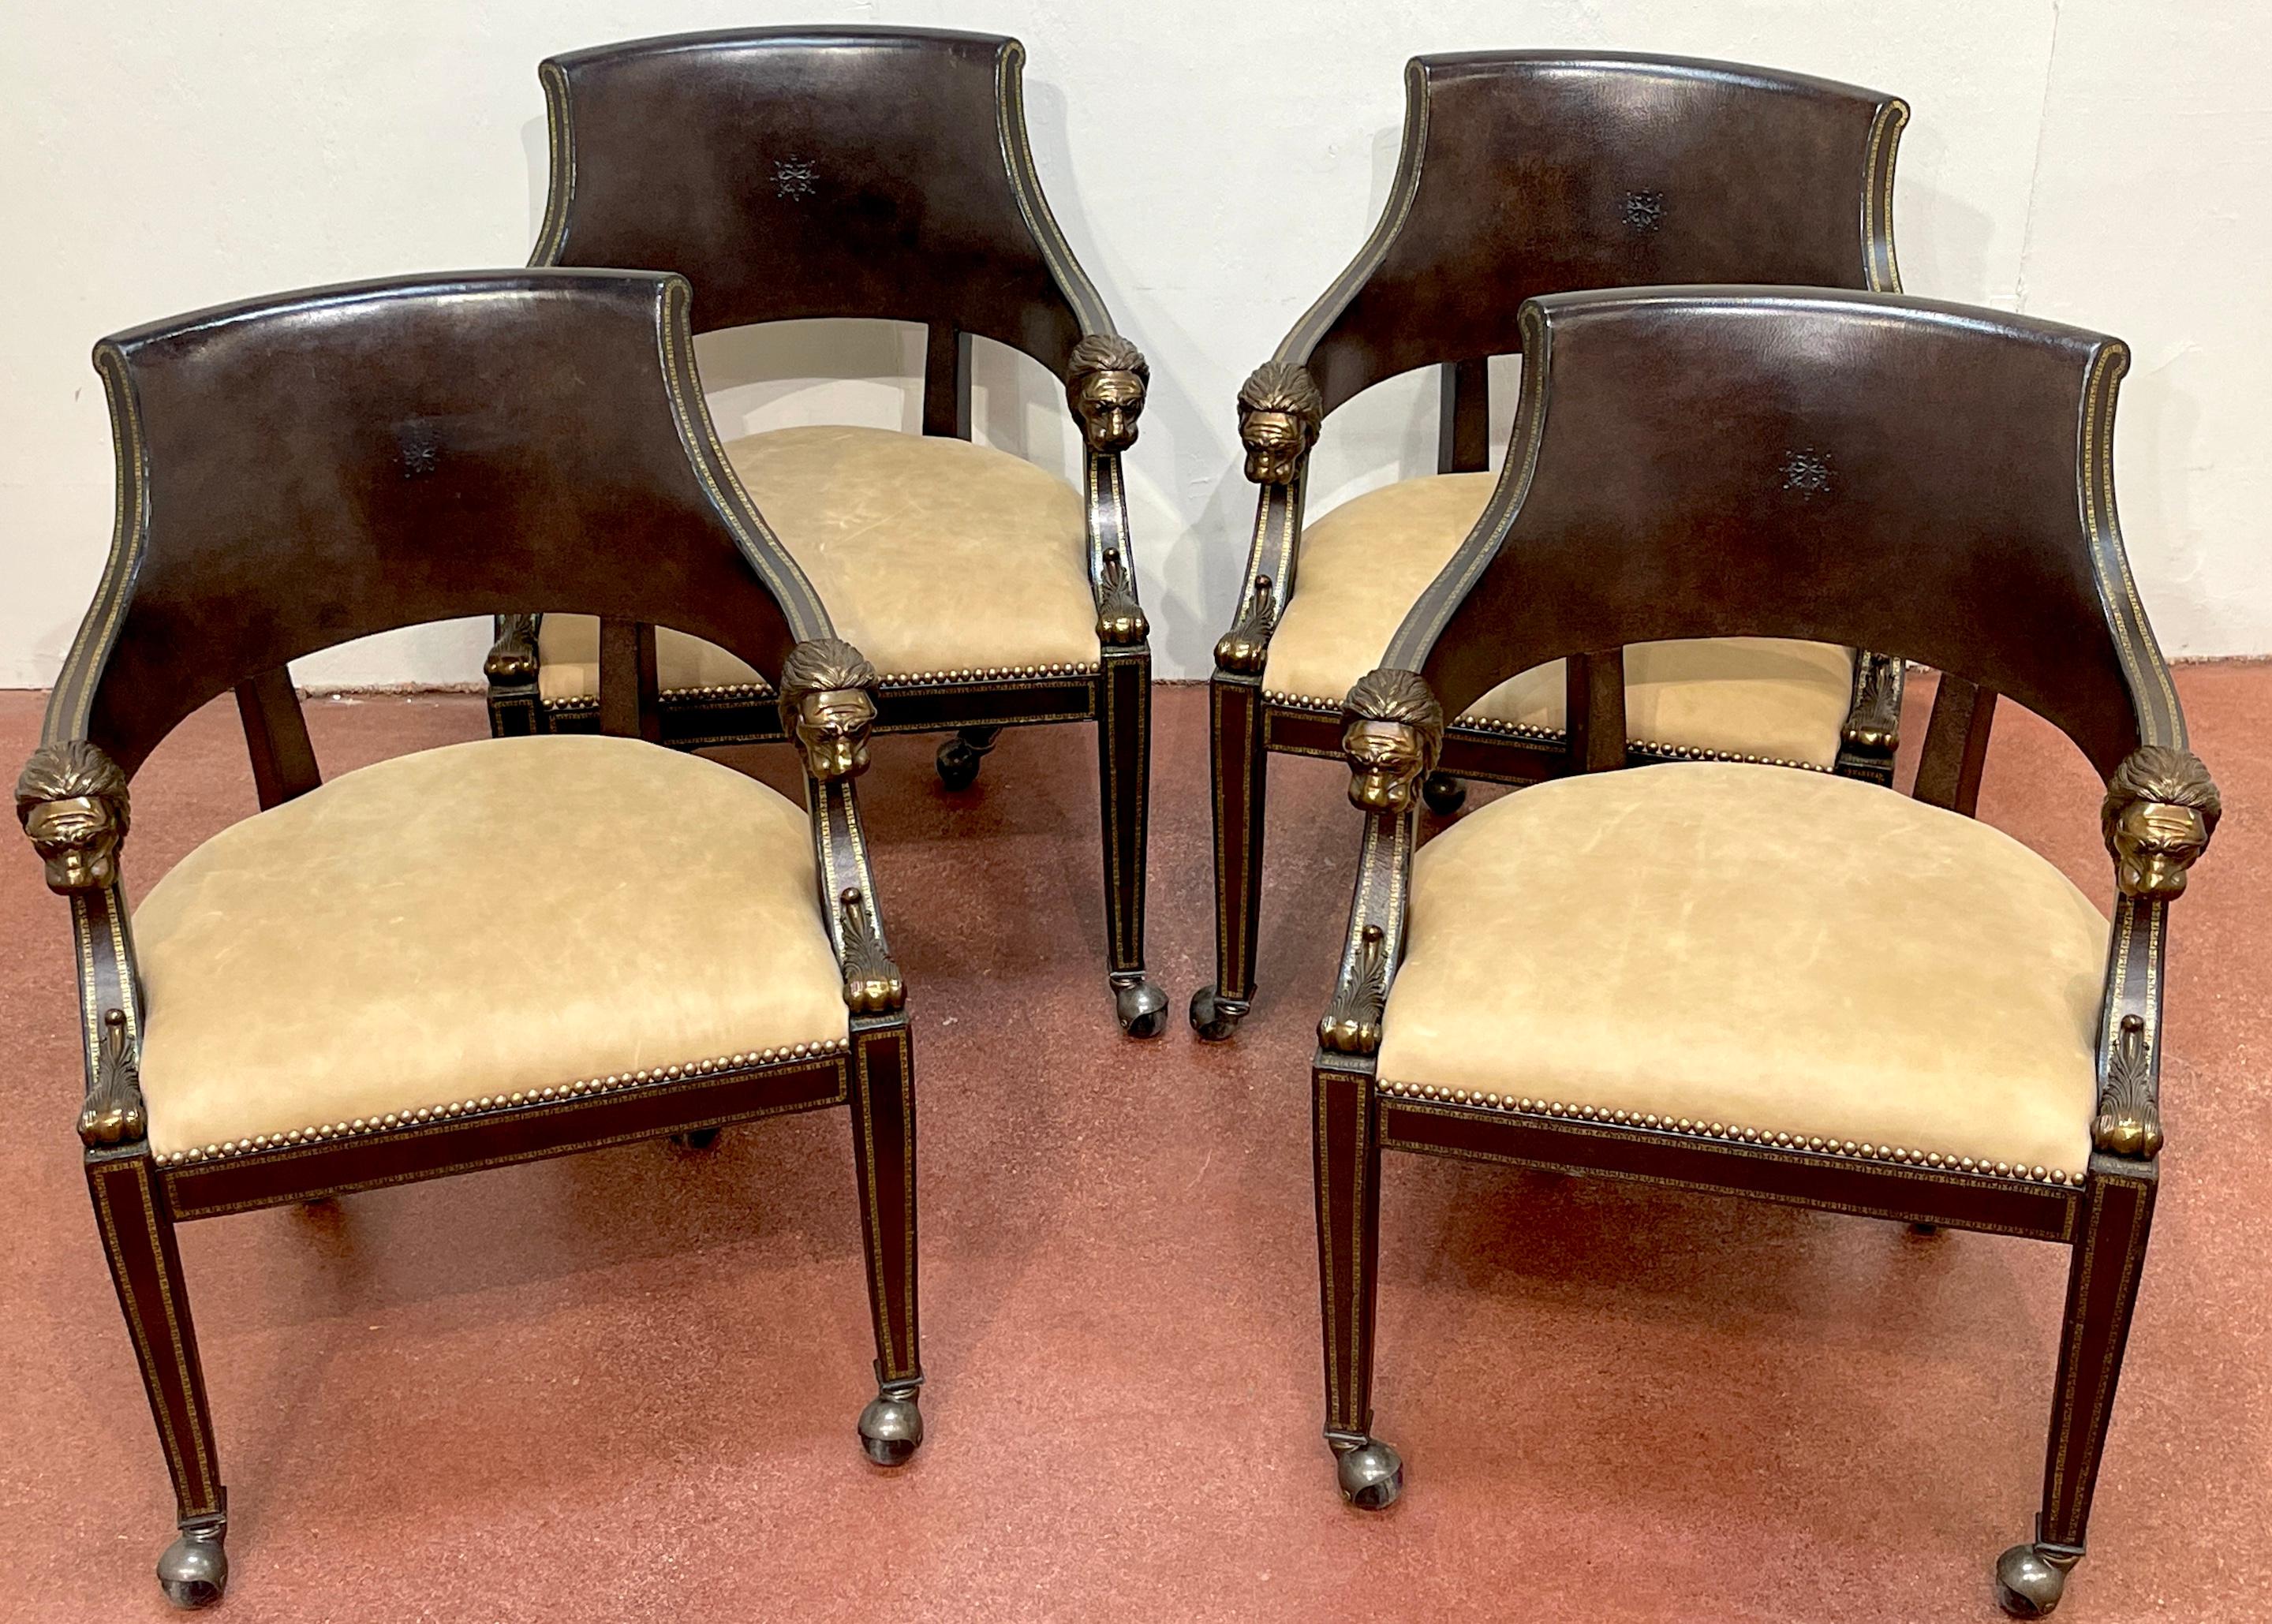 4 Gilt Leather Tooled Bronze Lion Head Armchairs on Castors, By Maitland-Smith

A set of four exquisite Regal Gilt Leather Tooled Bronze Lion Head Armchairs by Maitland-Smith. Standing at an impressive 33 inches high and 25 inches wide, these